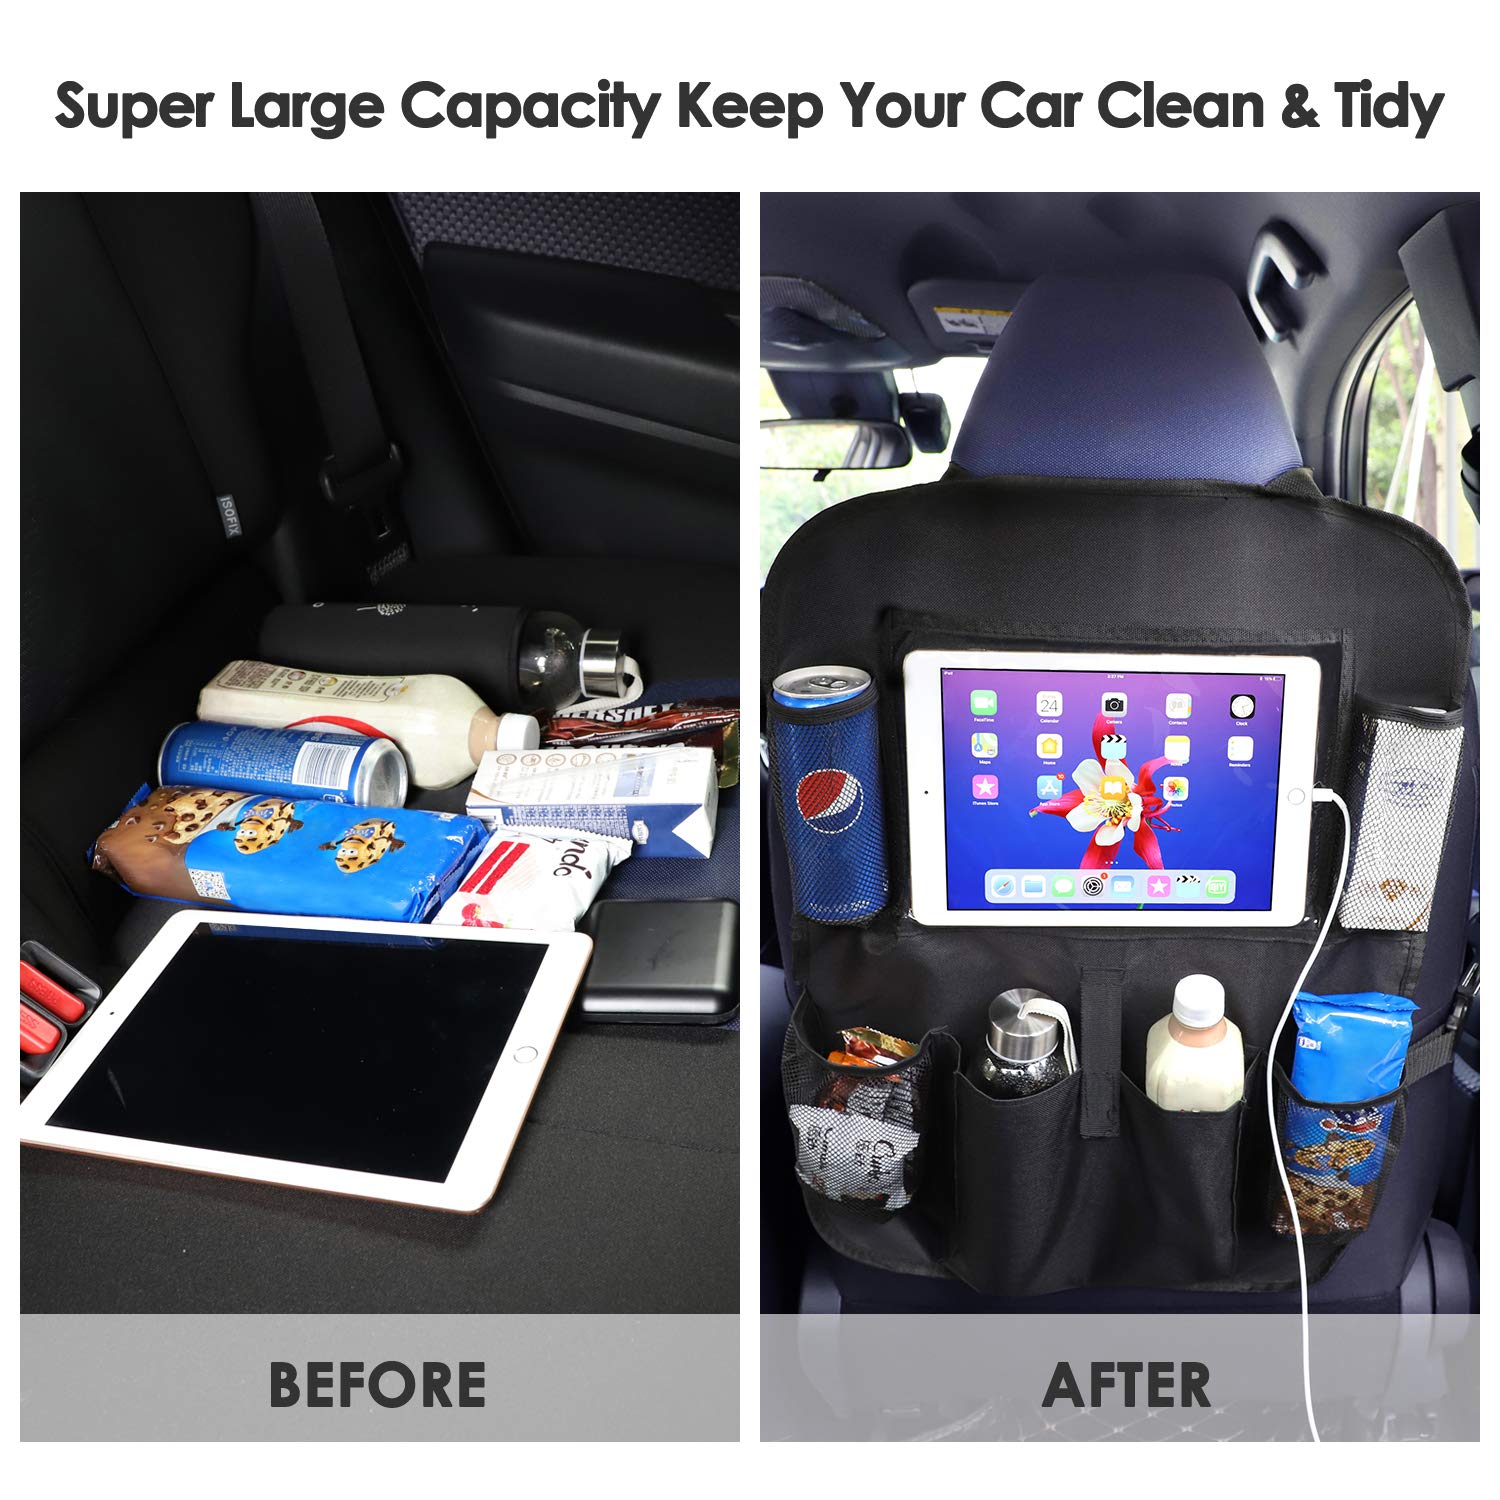 Backseat Car Organizer,matiugod 2 Pack Waterproof and Durable Car Organizer Back seat with Clear Screen 10.5 inch Tablet Holder and 9 Storage Pockets Seat Back Protectors Perfect for Road Trip to Organize Toys Drinks Books Pens 